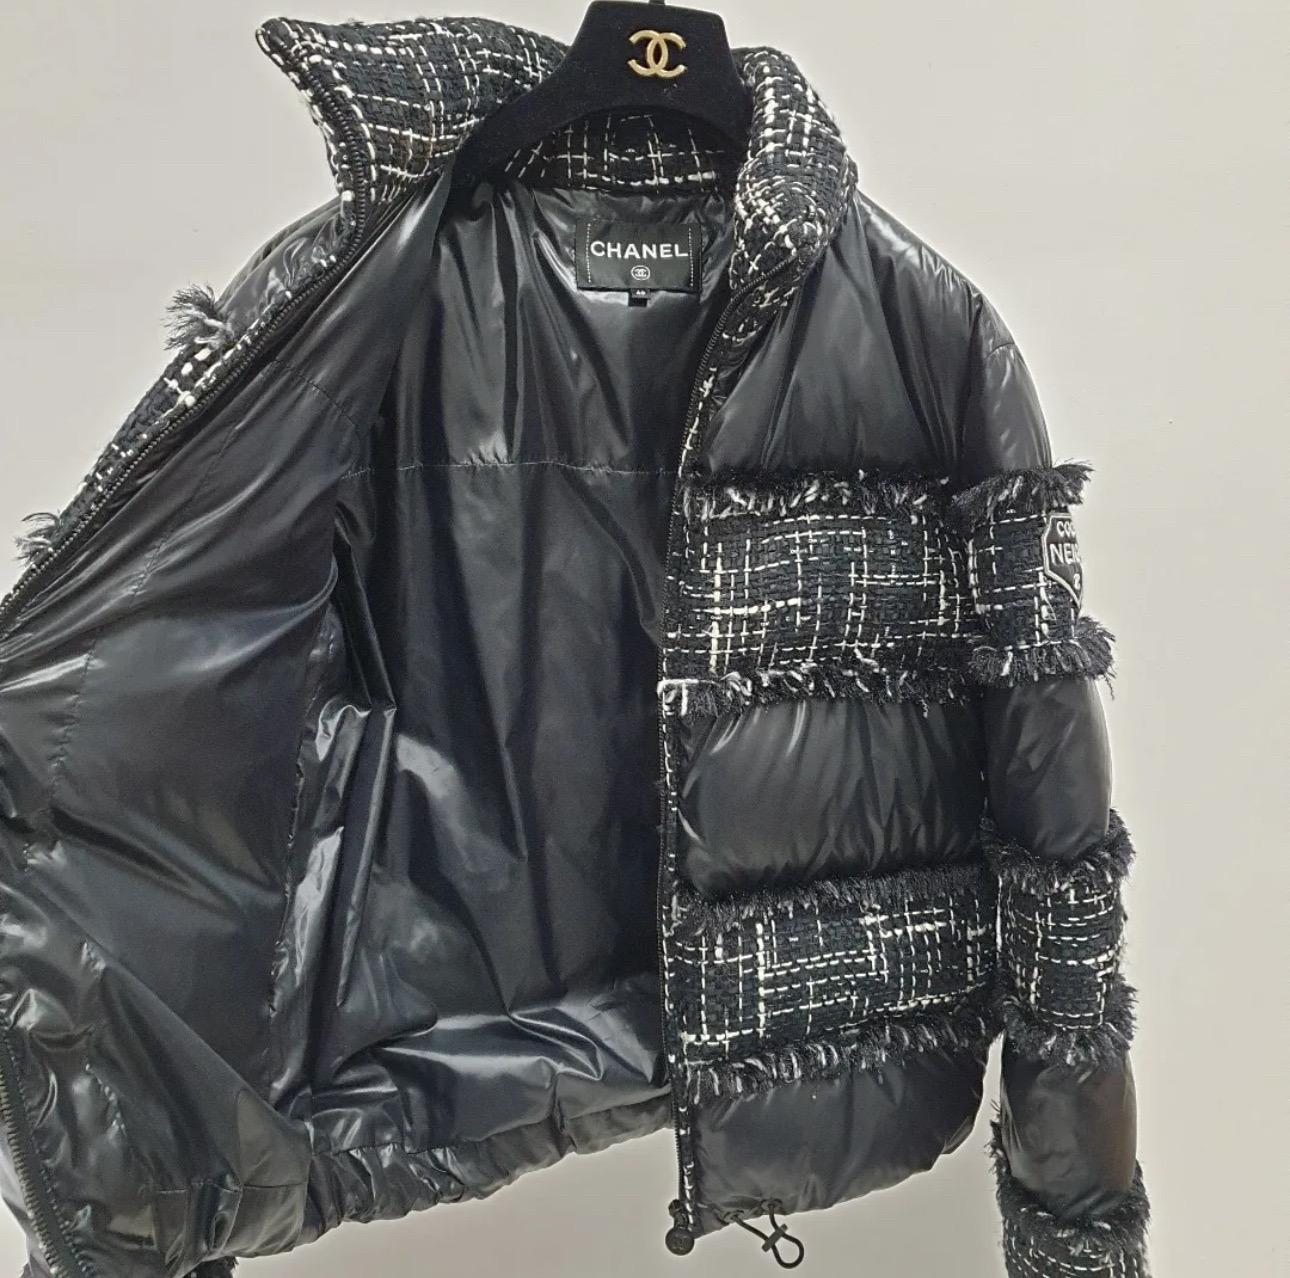 CHANEL 18B Coco Neige Ribbon Tweed Puffer Jacket In Excellent Condition For Sale In Krakow, PL